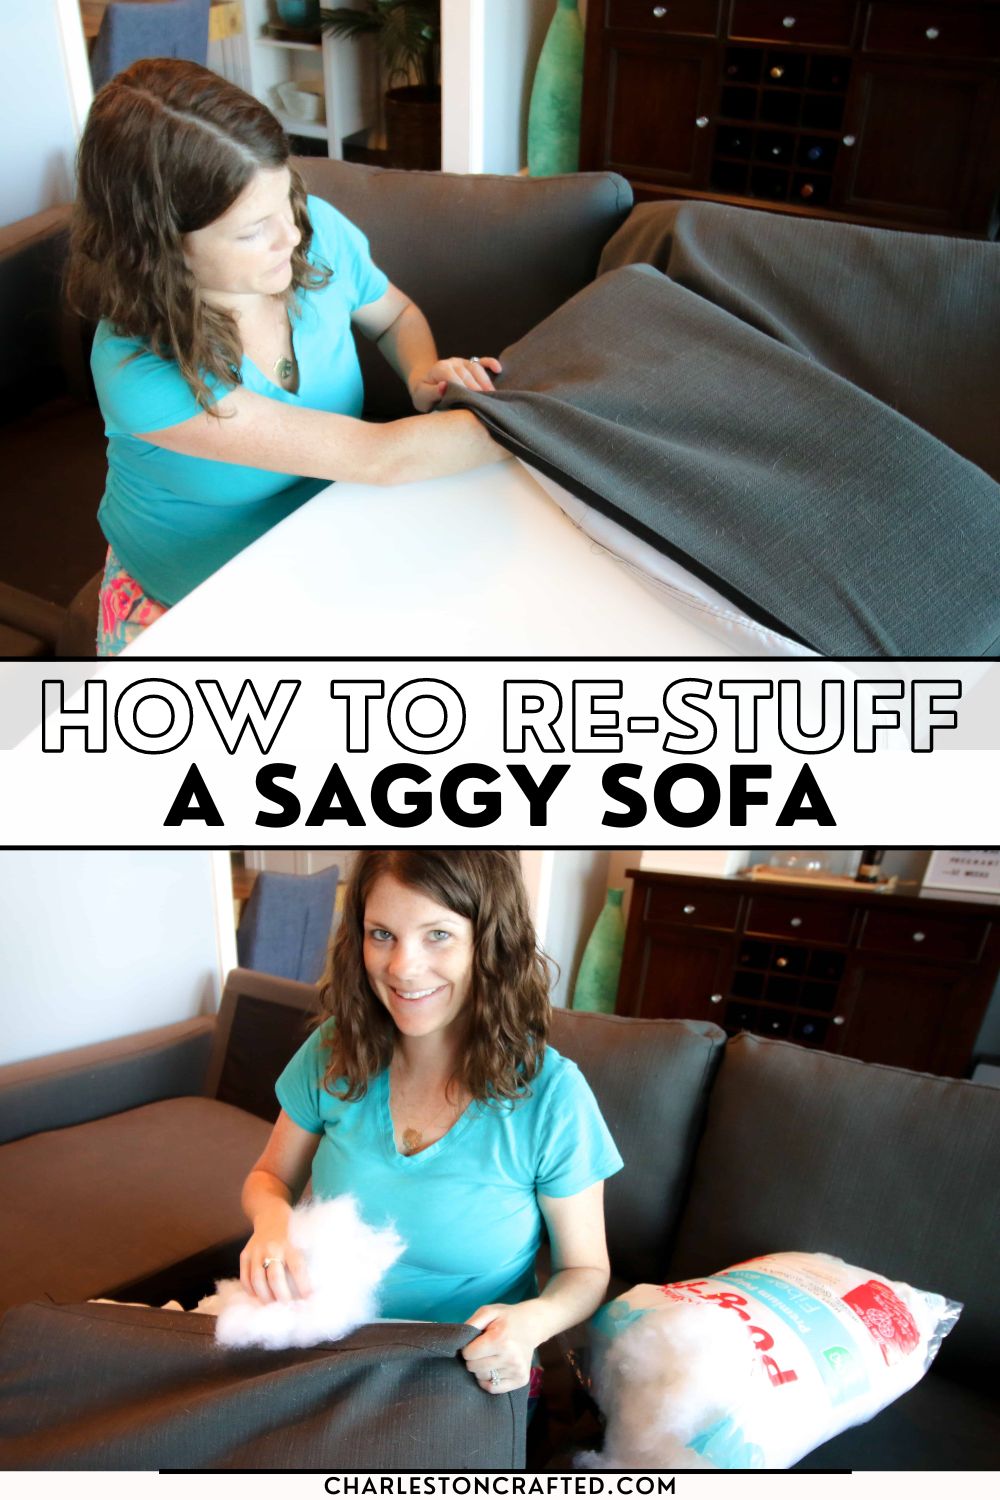 How to restuff sofa cushions & give new life to a saggy couch!